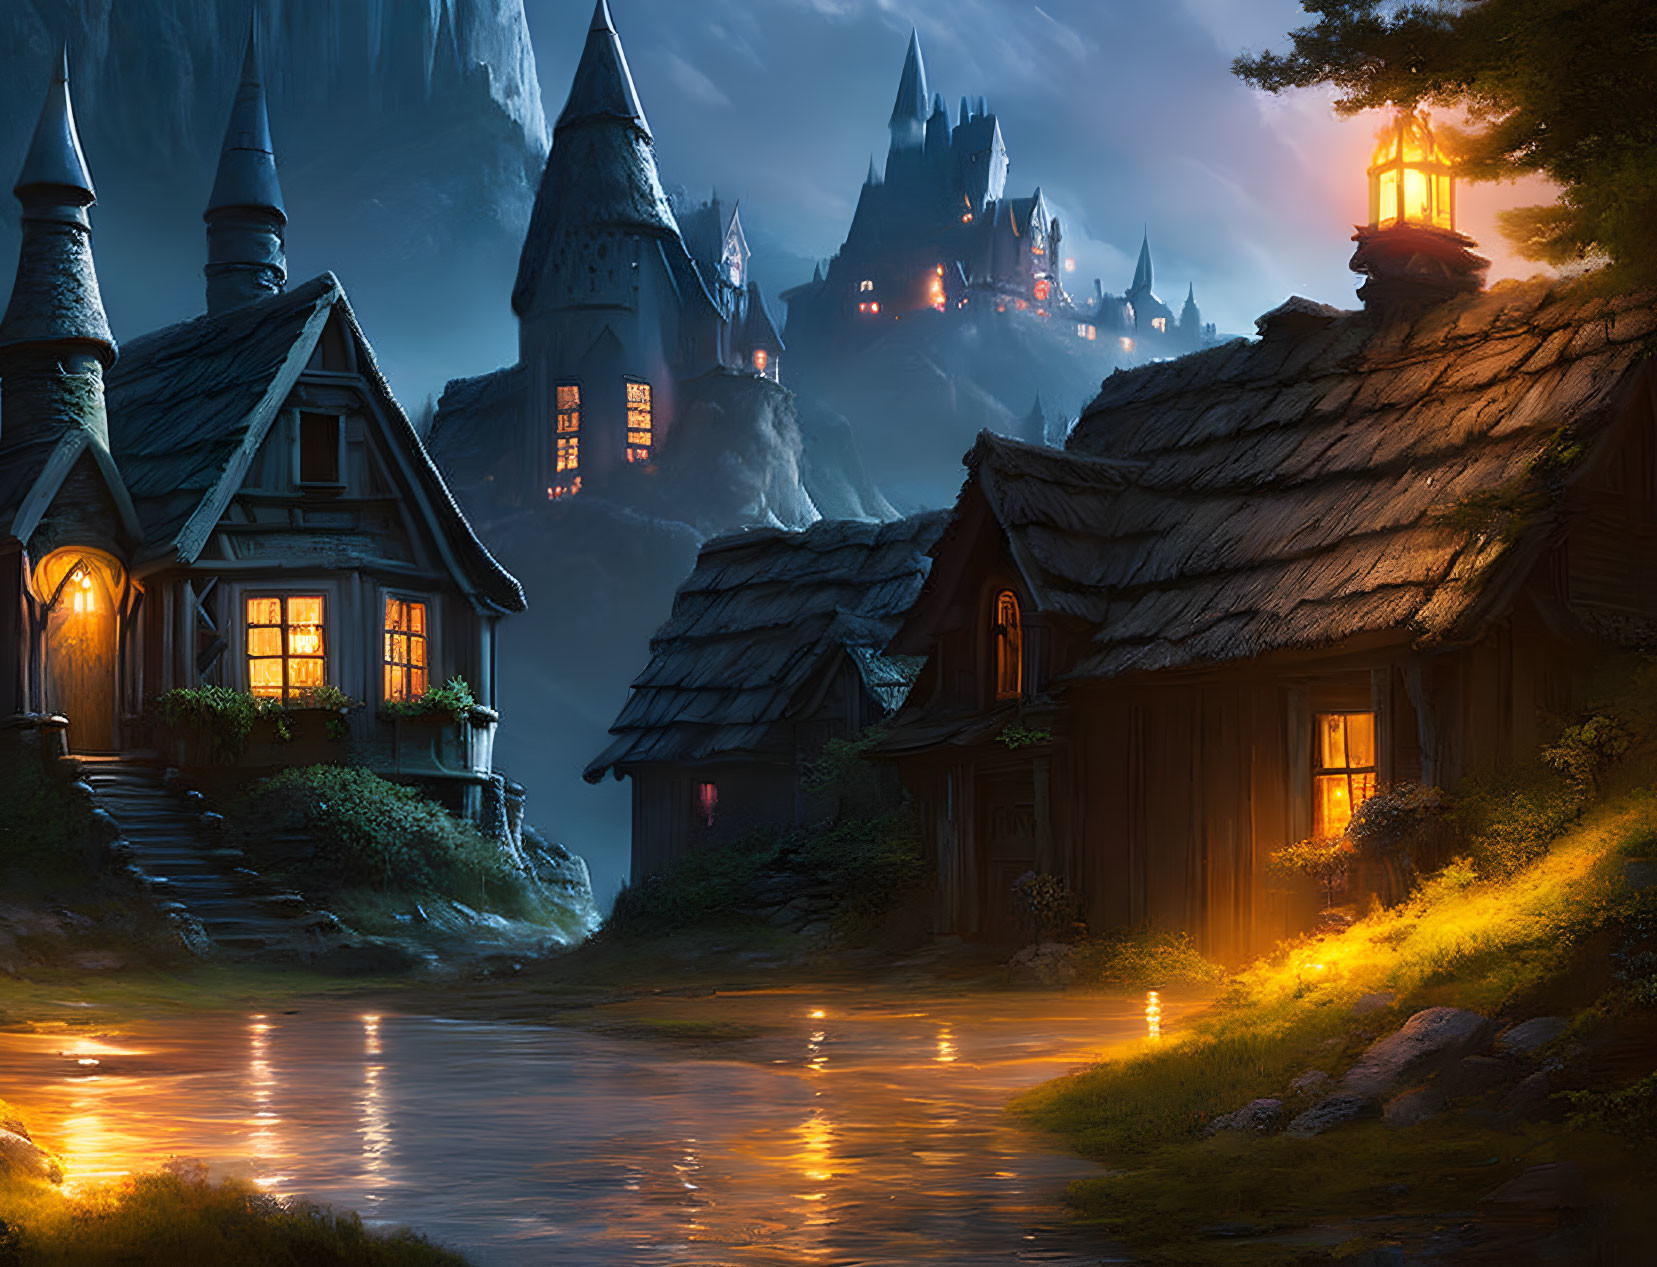 Twilight village with glowing windows, thatched-roof cottages, river, and distant castle.